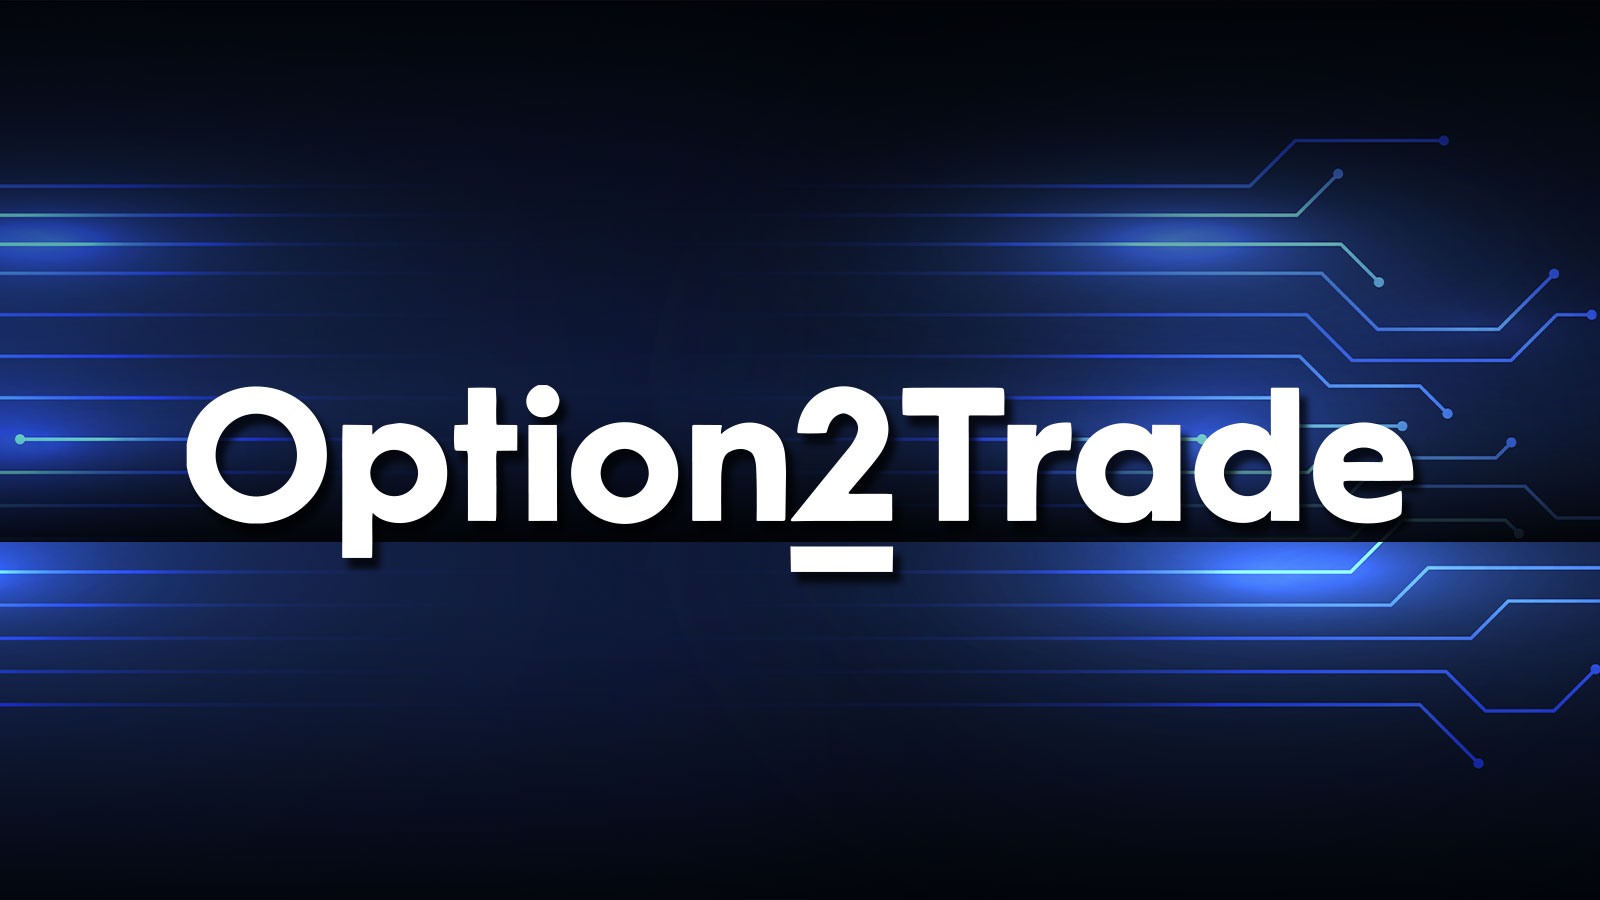 Option2Trade (O2T) Pre-Sale Accomplishes New Milestone in January, Introduces New Opportunities for Traders